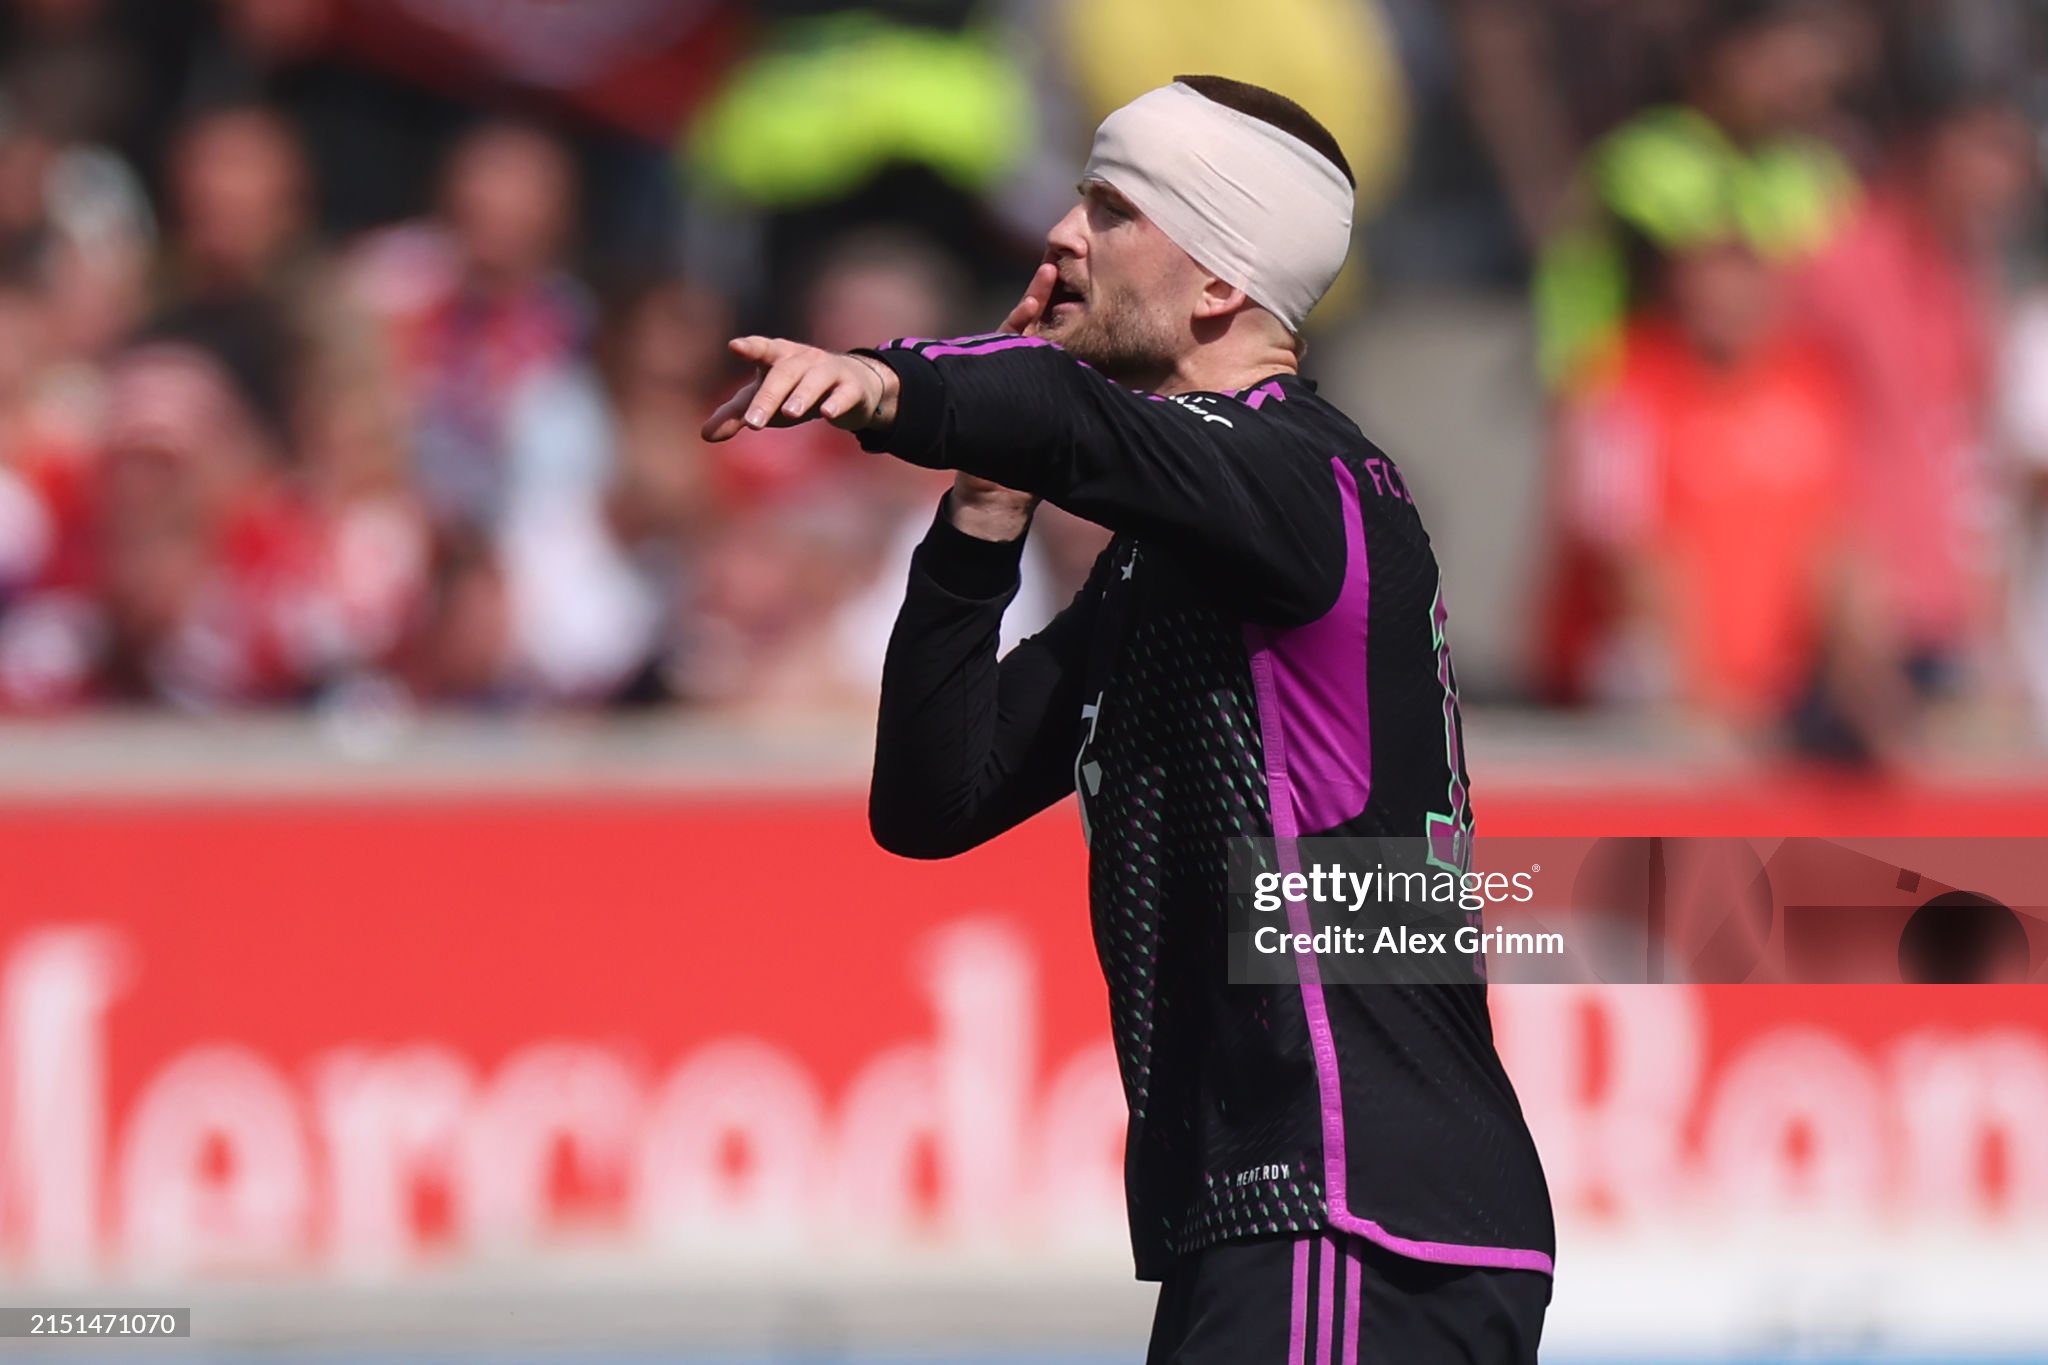 gettyimages-2151471070-2048x2048.jpg